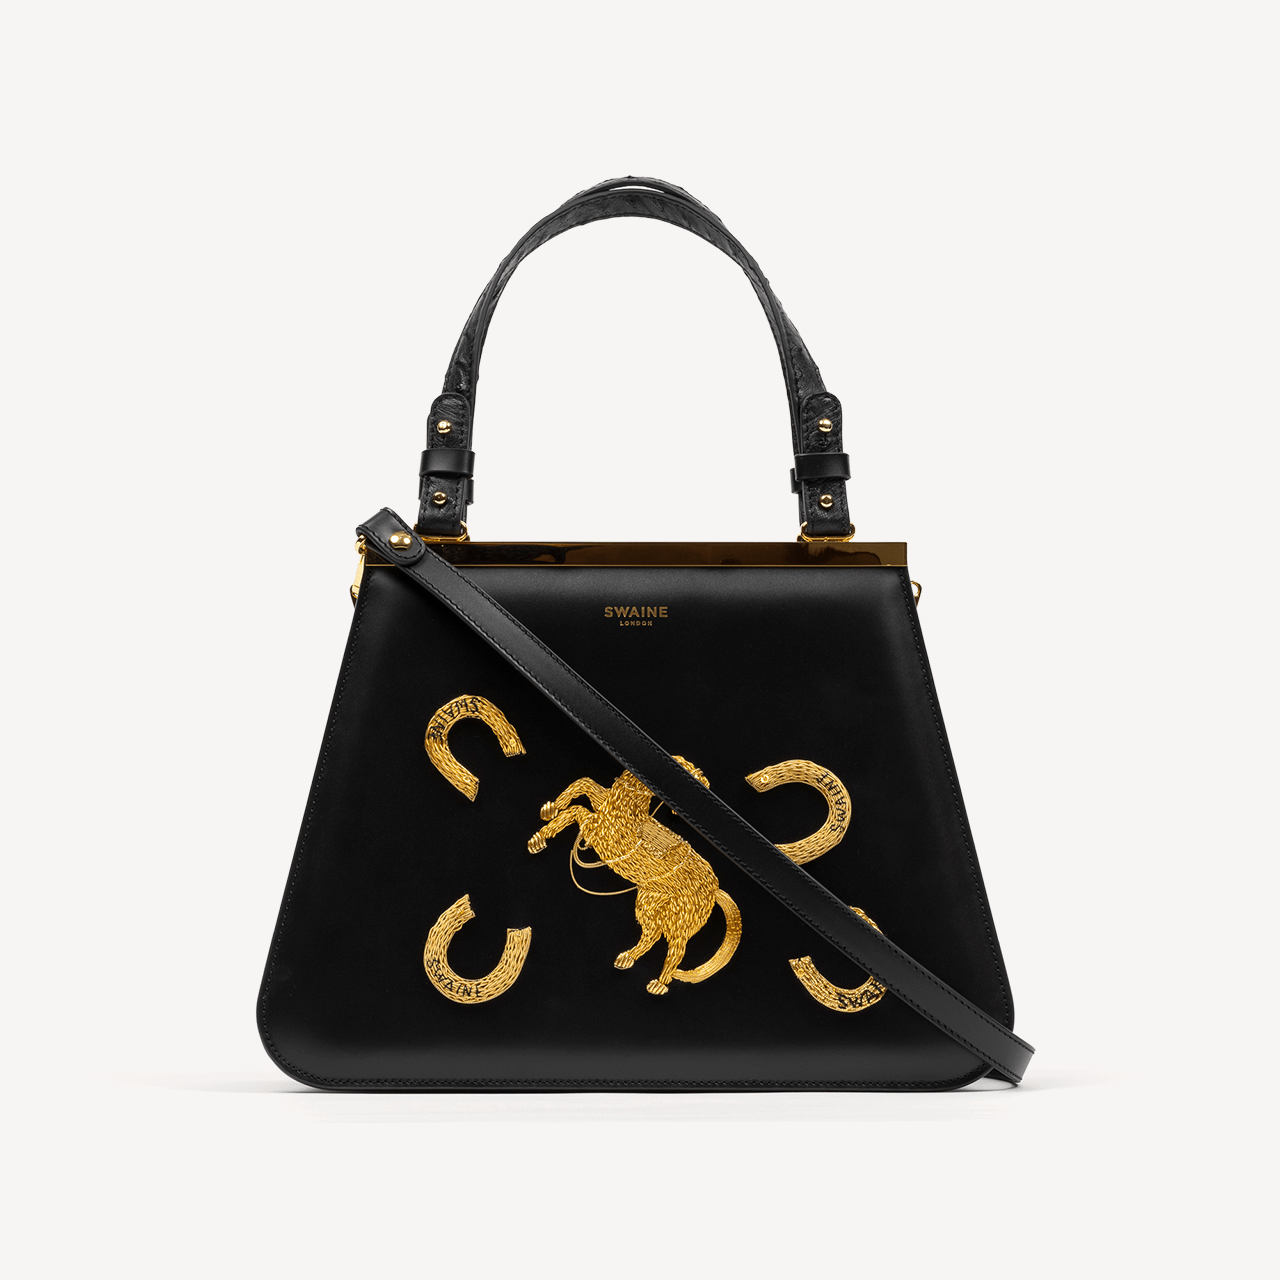 Limited Edition Margot with Gold Equestrian Embroidery - Swaine